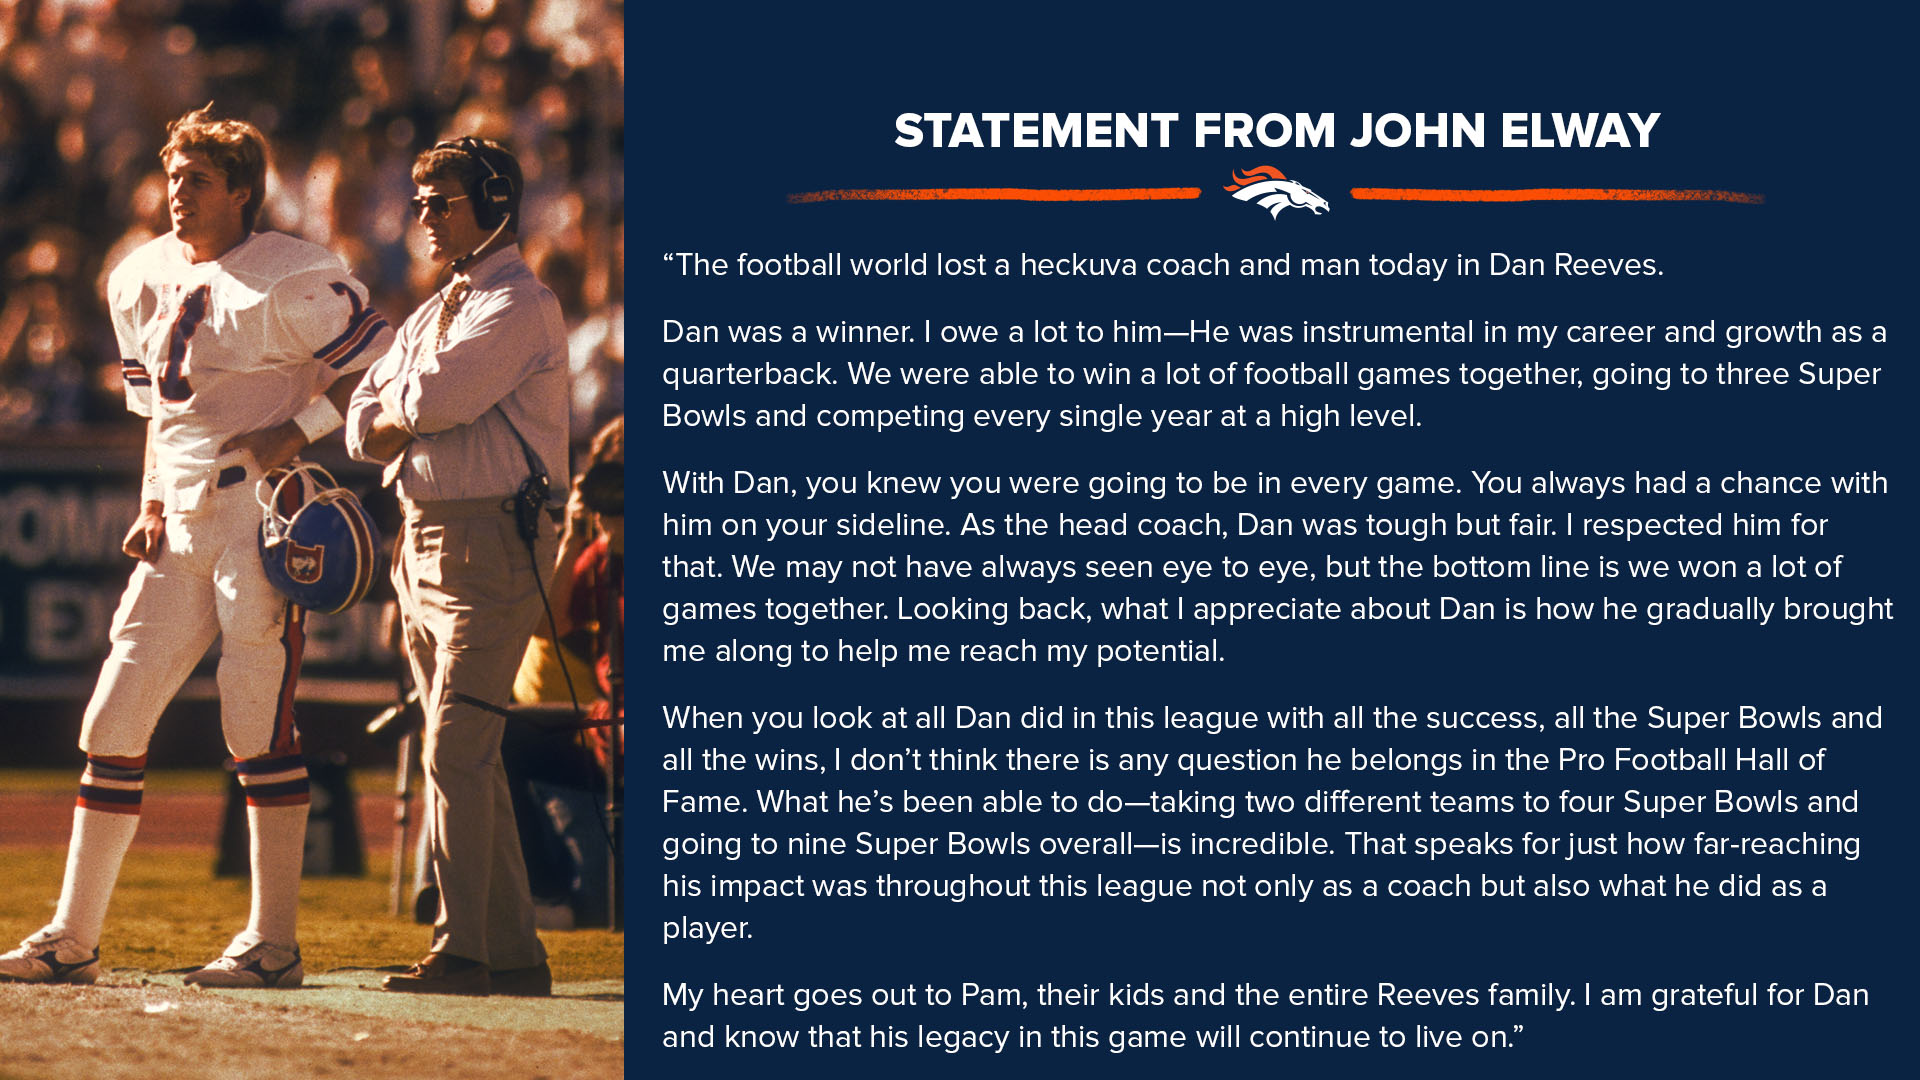 John Elway on X: The football world lost a heckuva coach and man today in  Dan Reeves. Dan was a winner and I owe a lot to him. My heart goes out